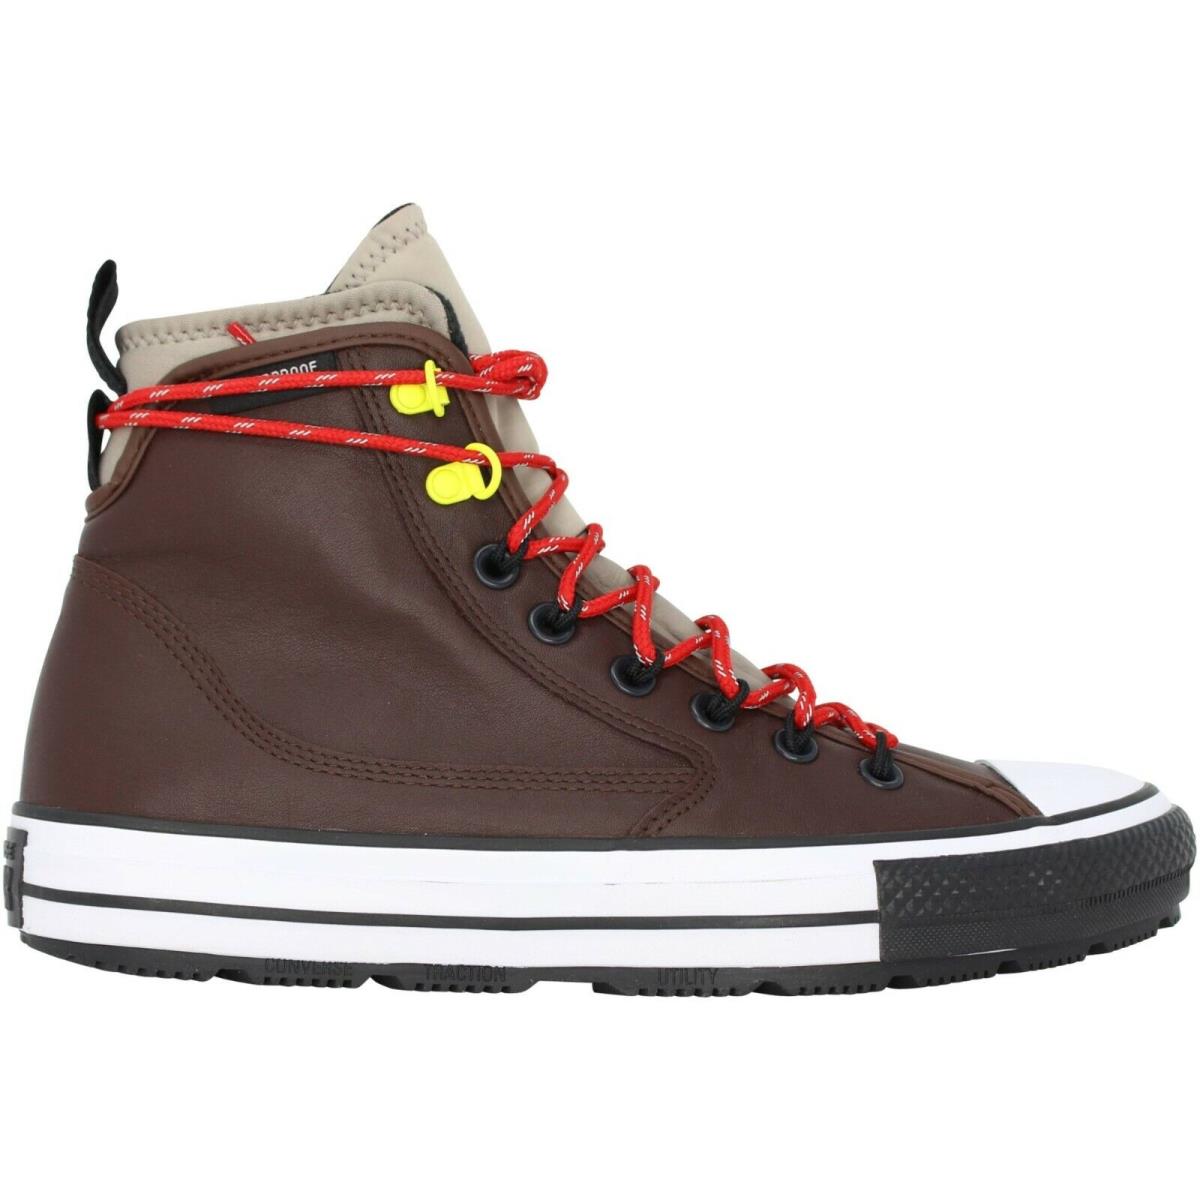 Converse Chuck Taylor All Star Terrain 169588C Ctas Boots Root Red Black White - Brown